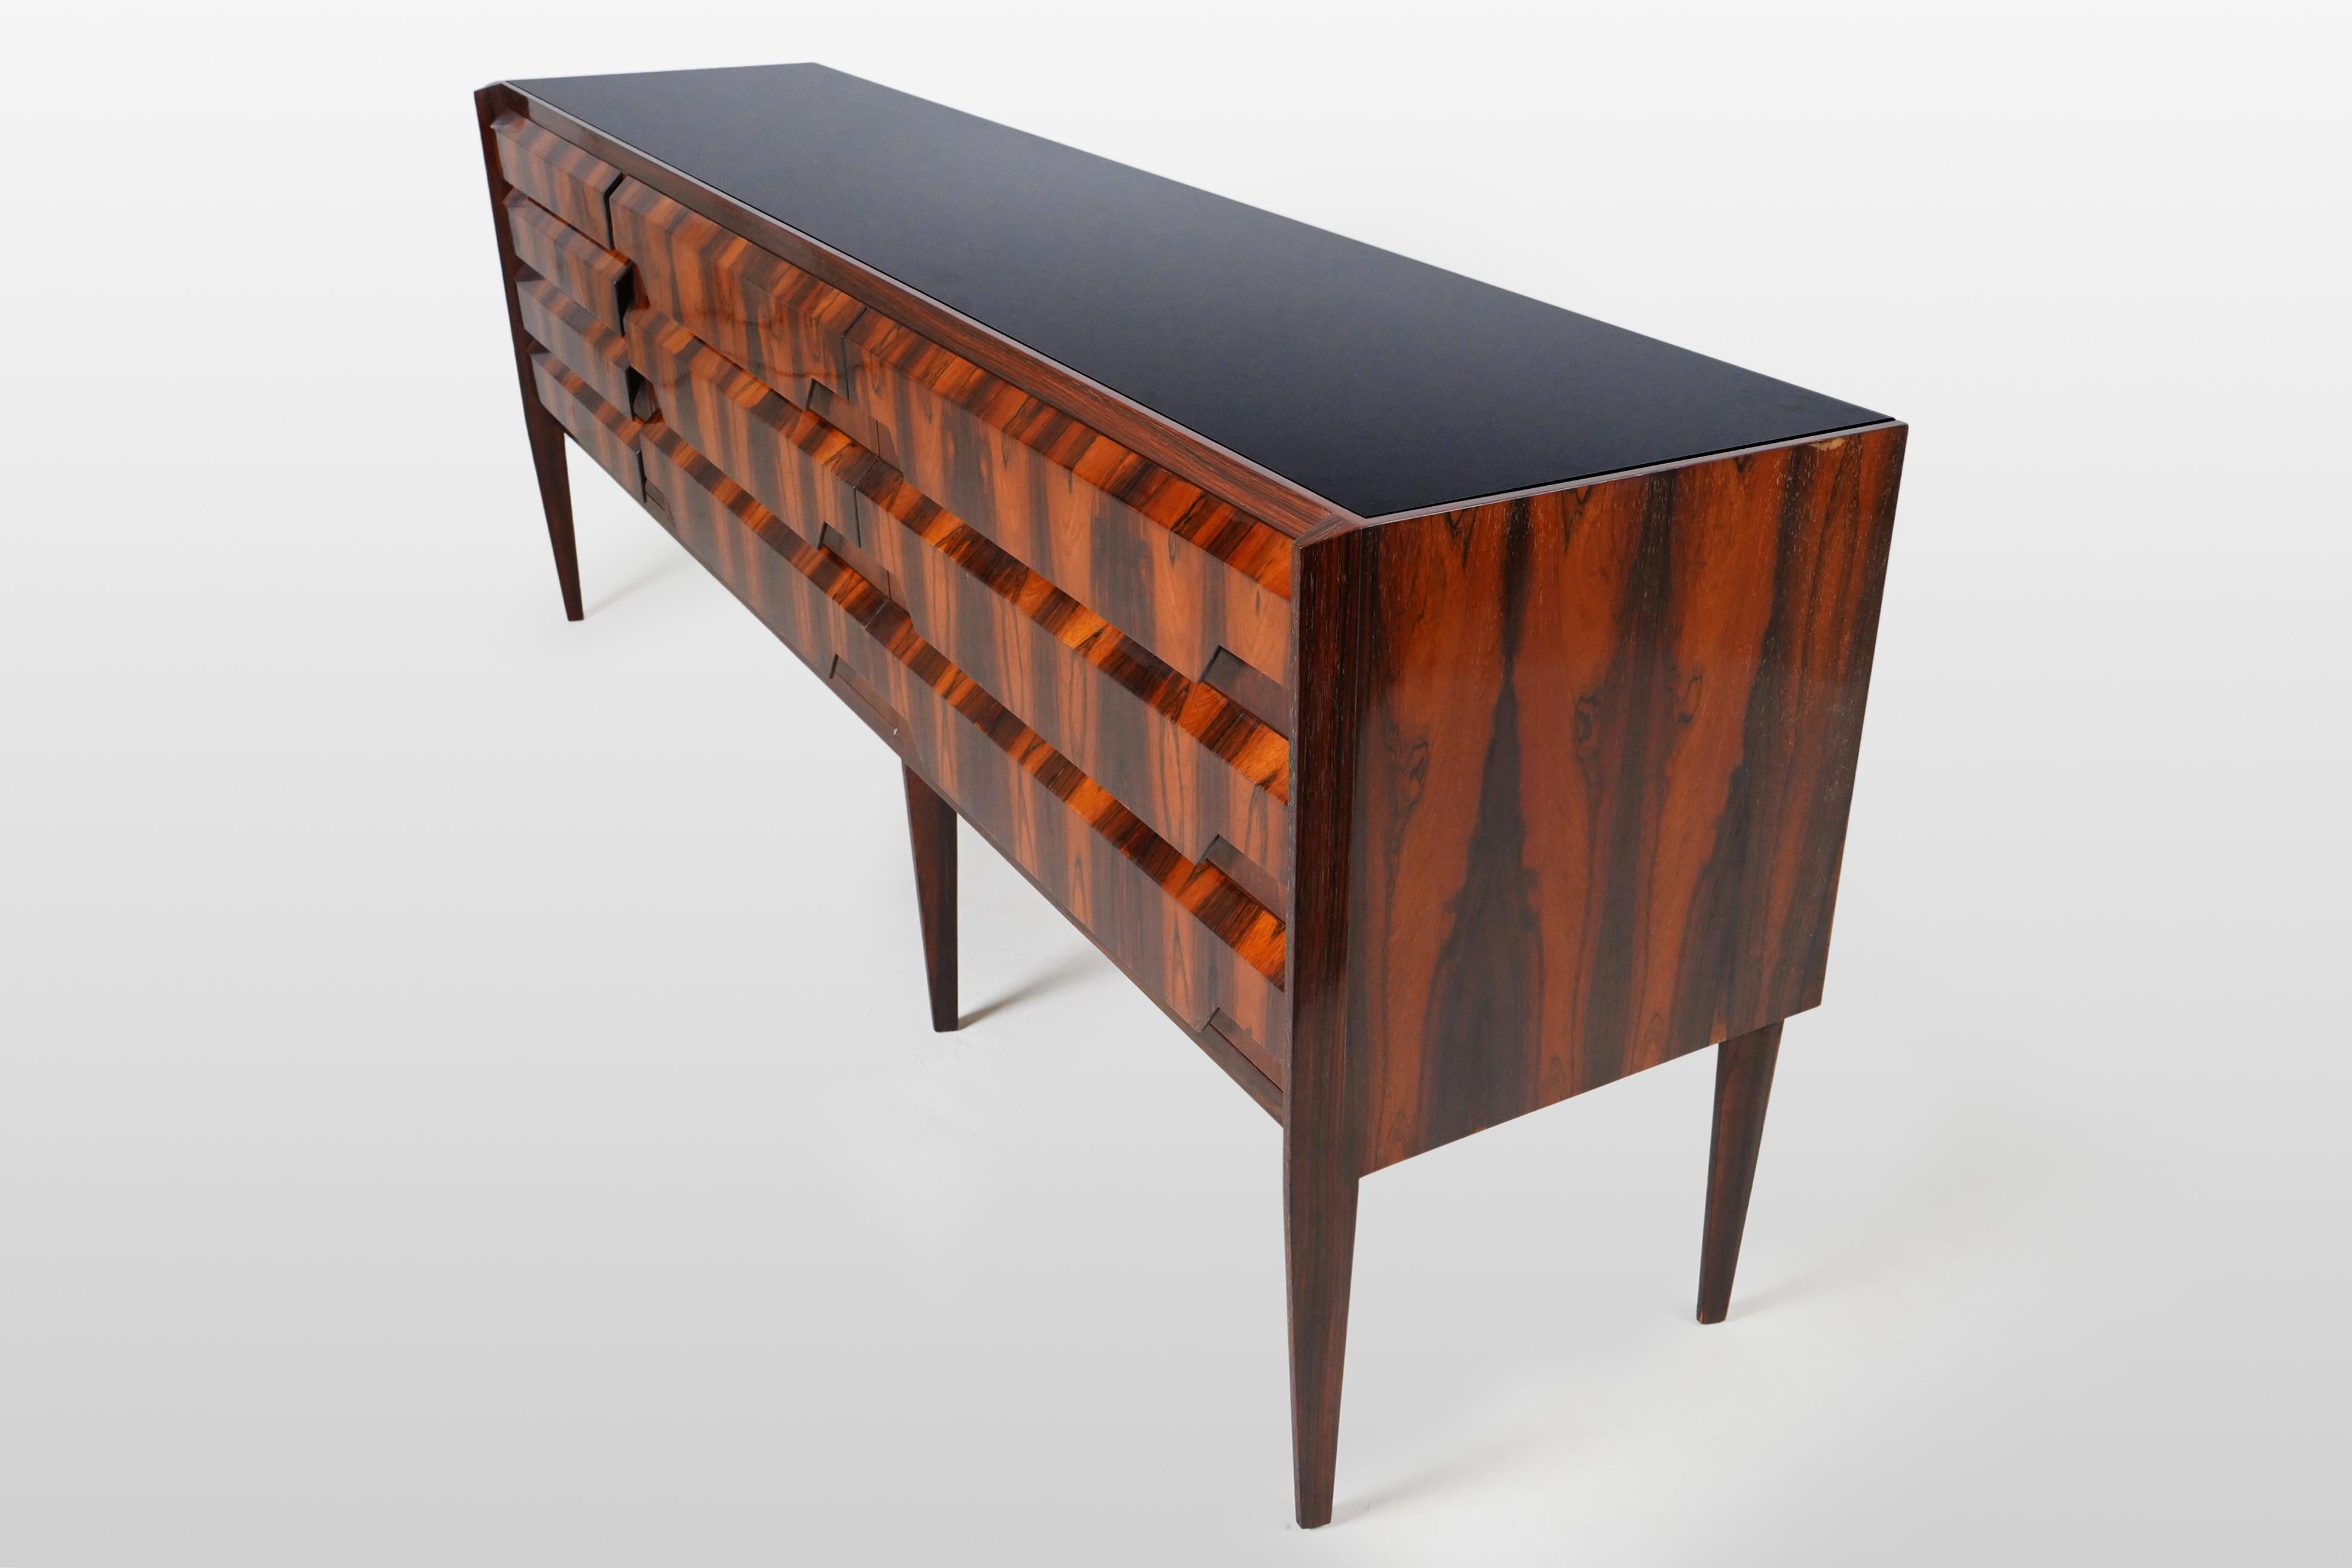 This exceptional sideboard features richly figured Makassar veneers, a black glass top and ten drawers. It's quite rare to see veneer applied vertically to relatively shallow drawers and the effect is very dramatic. The chamfered drawer fronts with